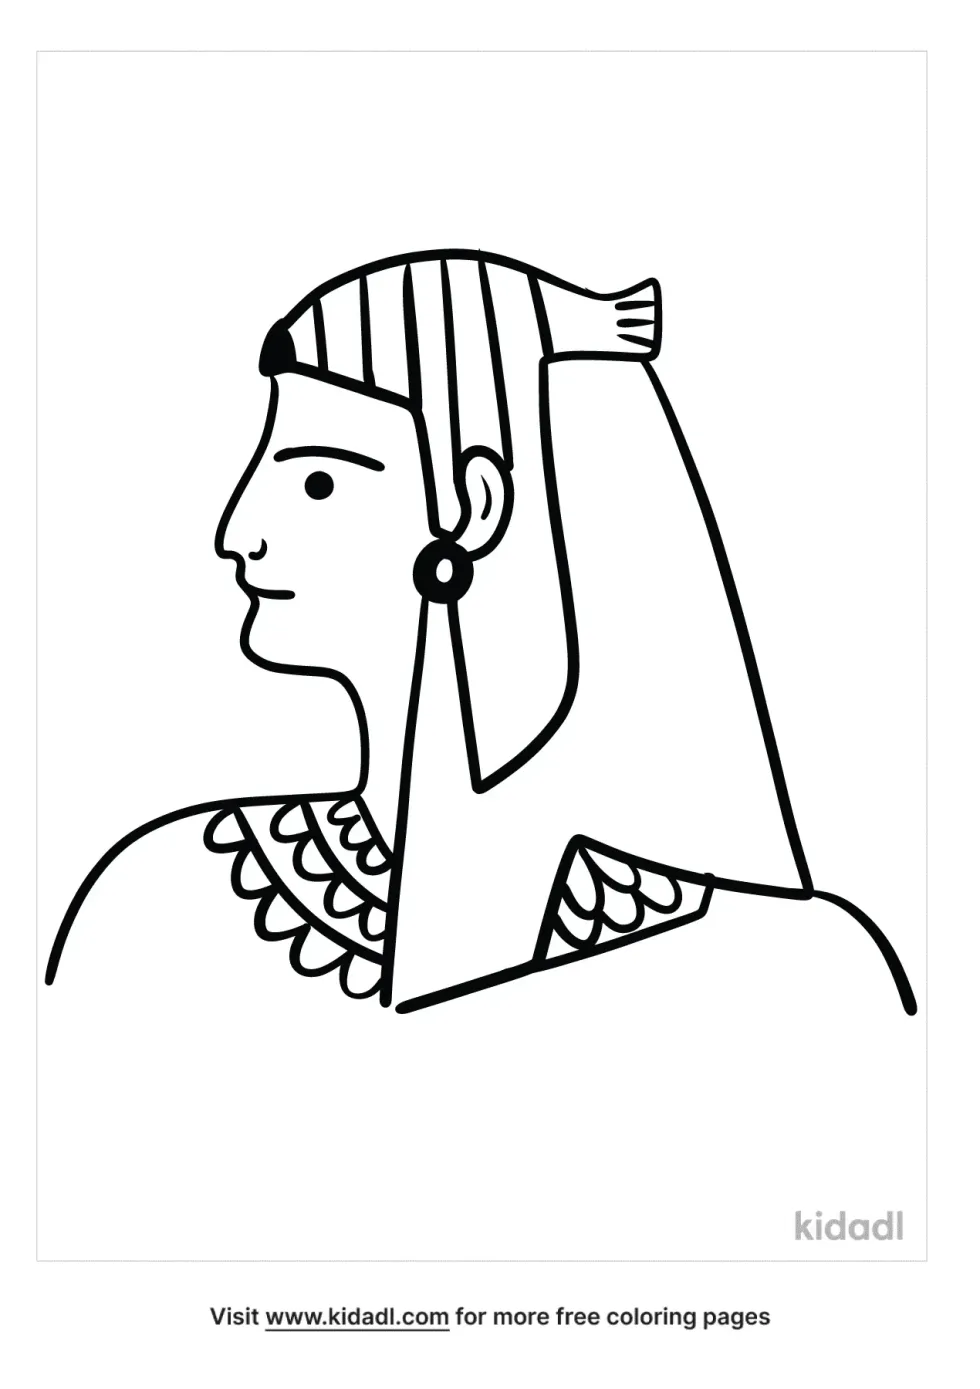 Amenhotep Coloring Page